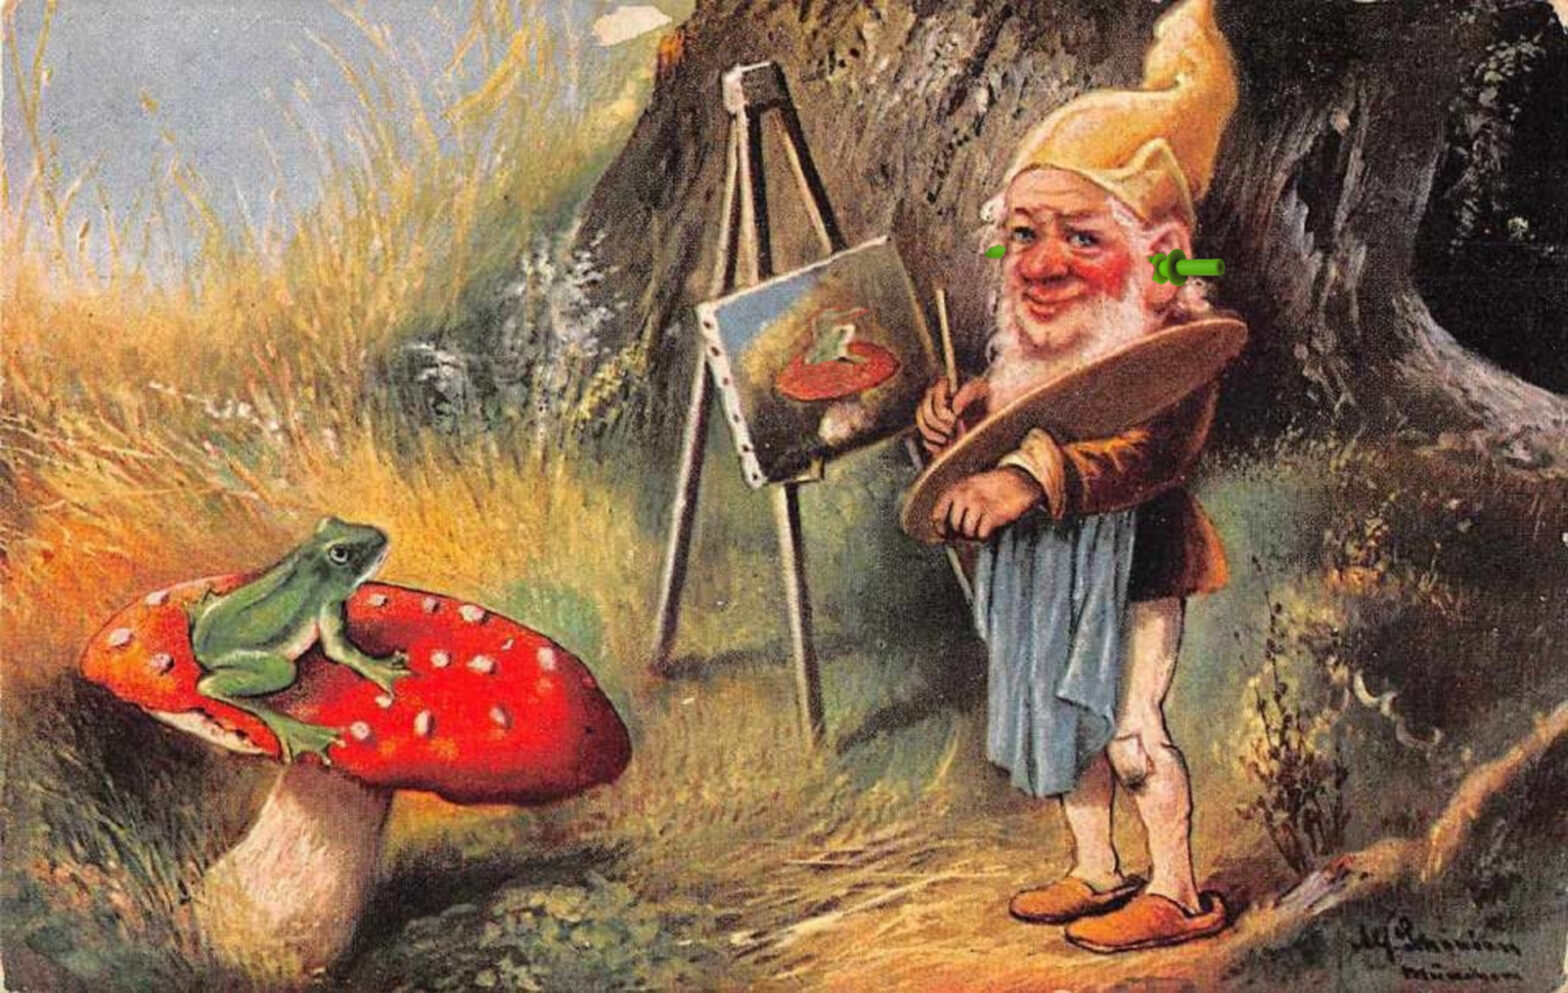 CC BY 2.5 by Light_current (earplug) and Poikilos (photomanip); Gnome Elf Painting Frog on Mushroom Artist Unknown Ca 1912 CC0